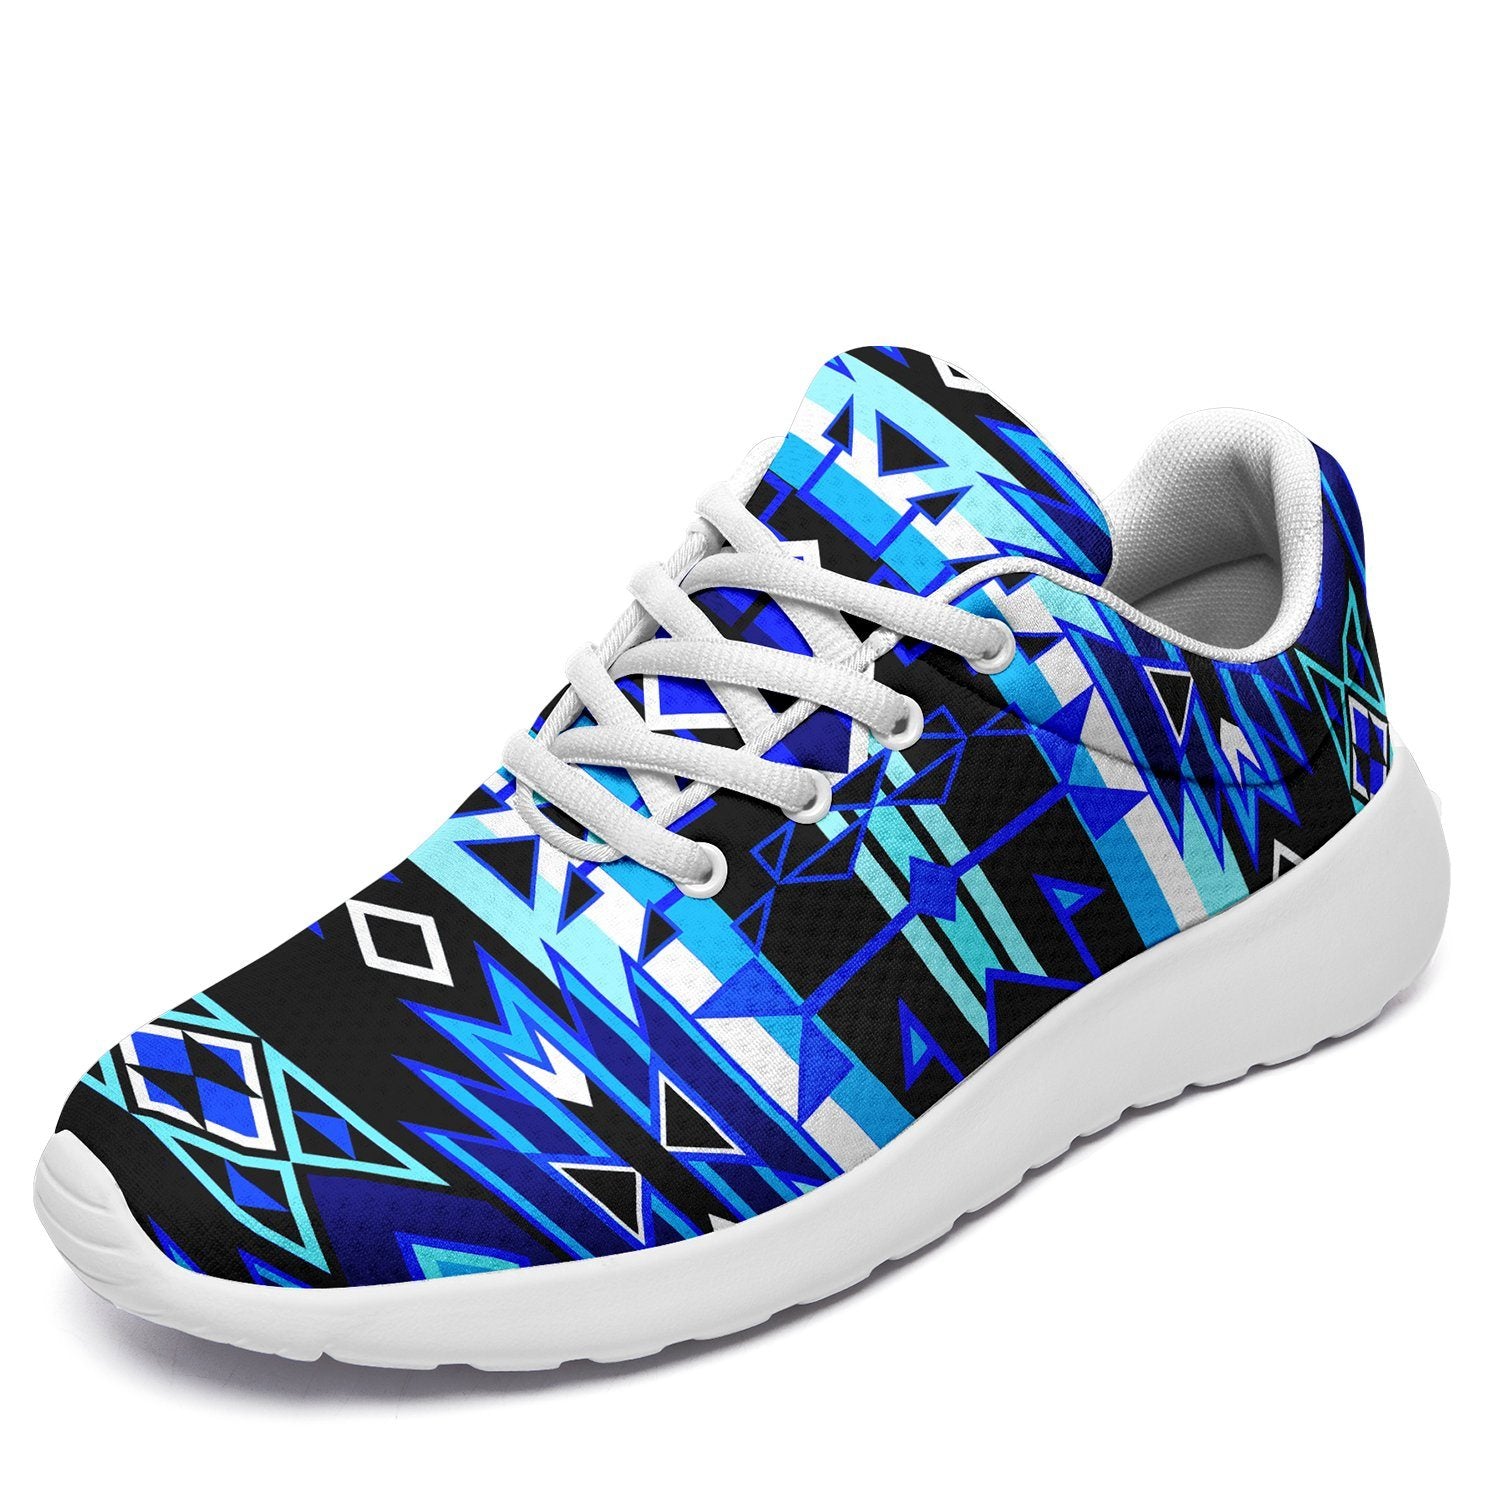 Force of Nature Winter Night Ikkaayi Sport Sneakers 49 Dzine US Women 4.5 / US Youth 3.5 / EUR 35 White Sole 